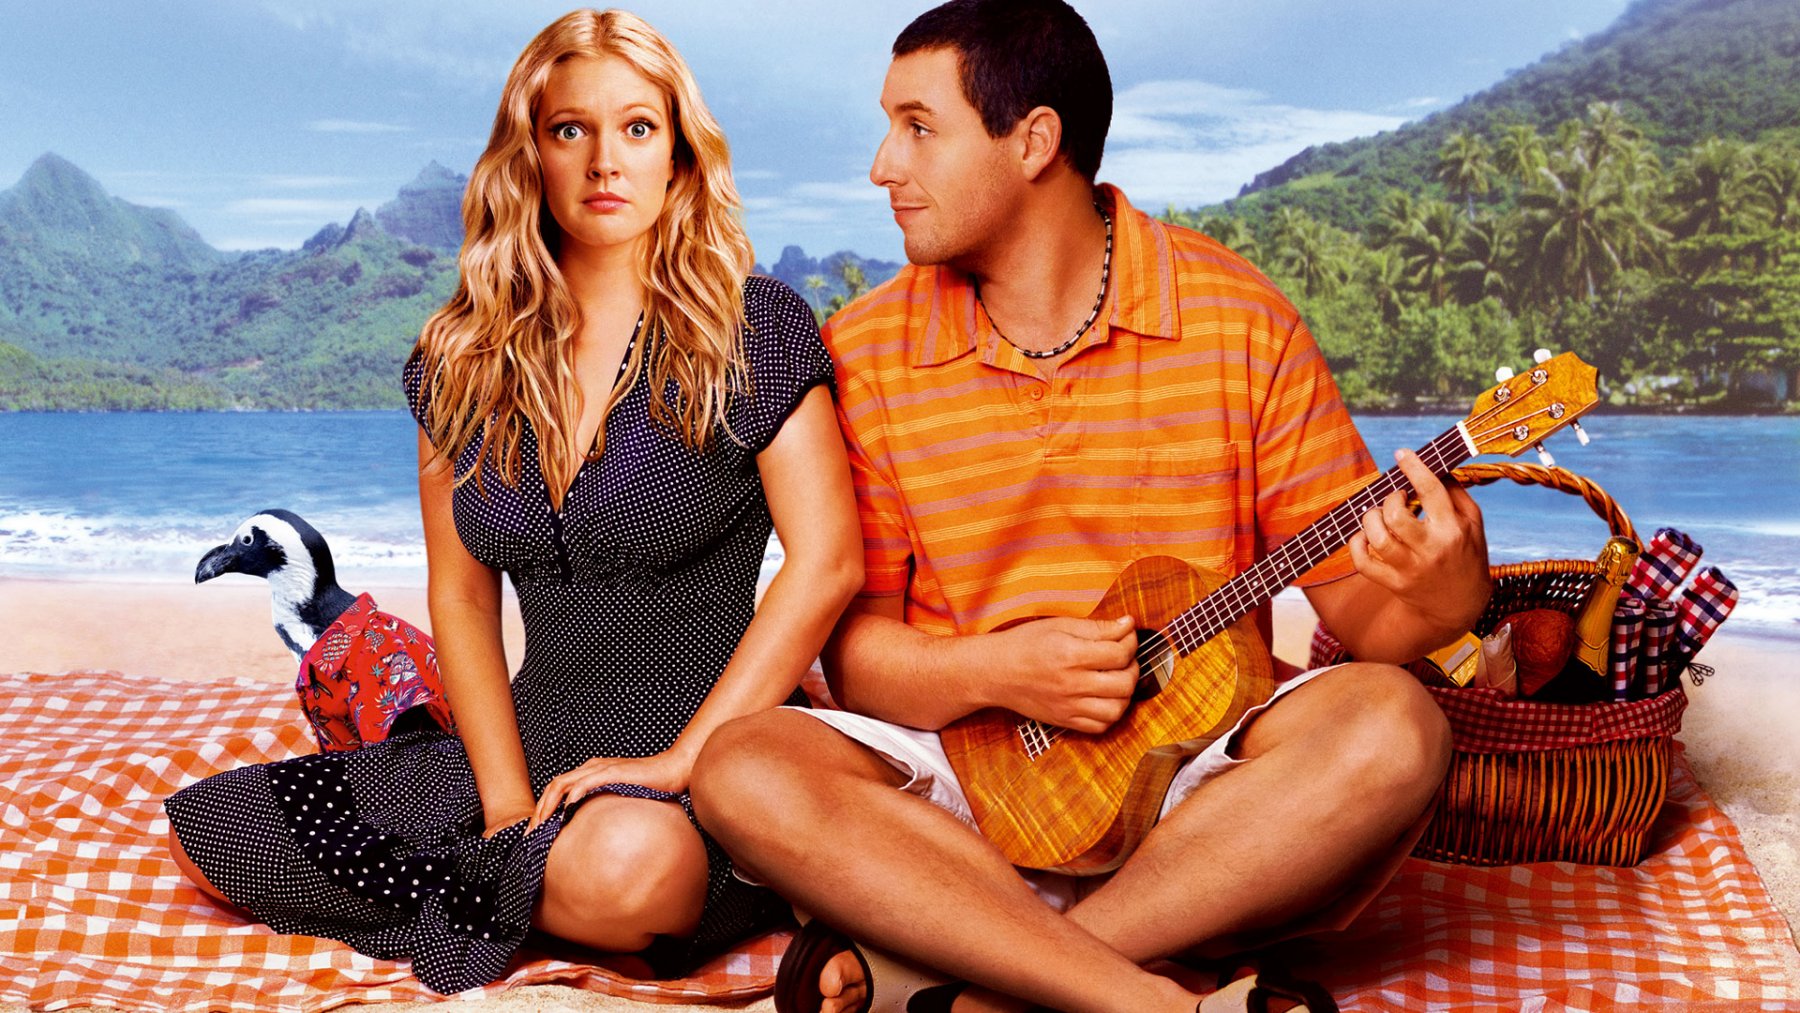 50 First Dates #4